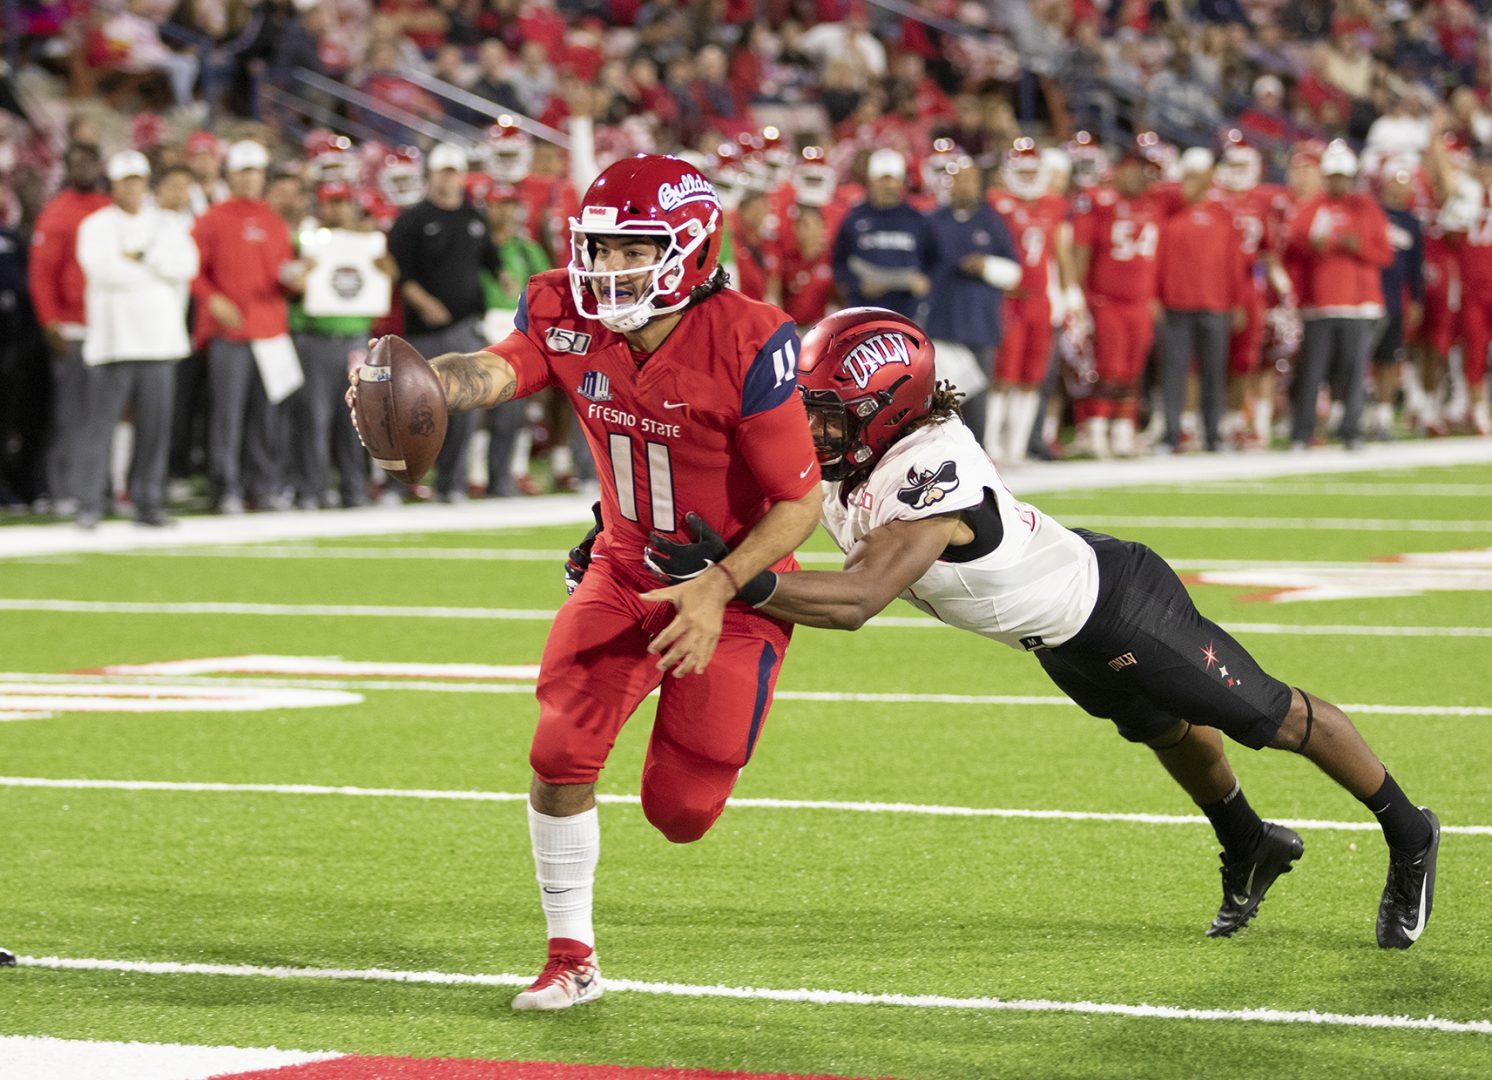 Fresno State quarterback Jorge Reyna scrambles in for a touchdown against the University of Nevada Las Vegas during a home game at Bulldogs Stadium on Friday, Oct. 18, 2019. (Armando Carreno/The Collegian)